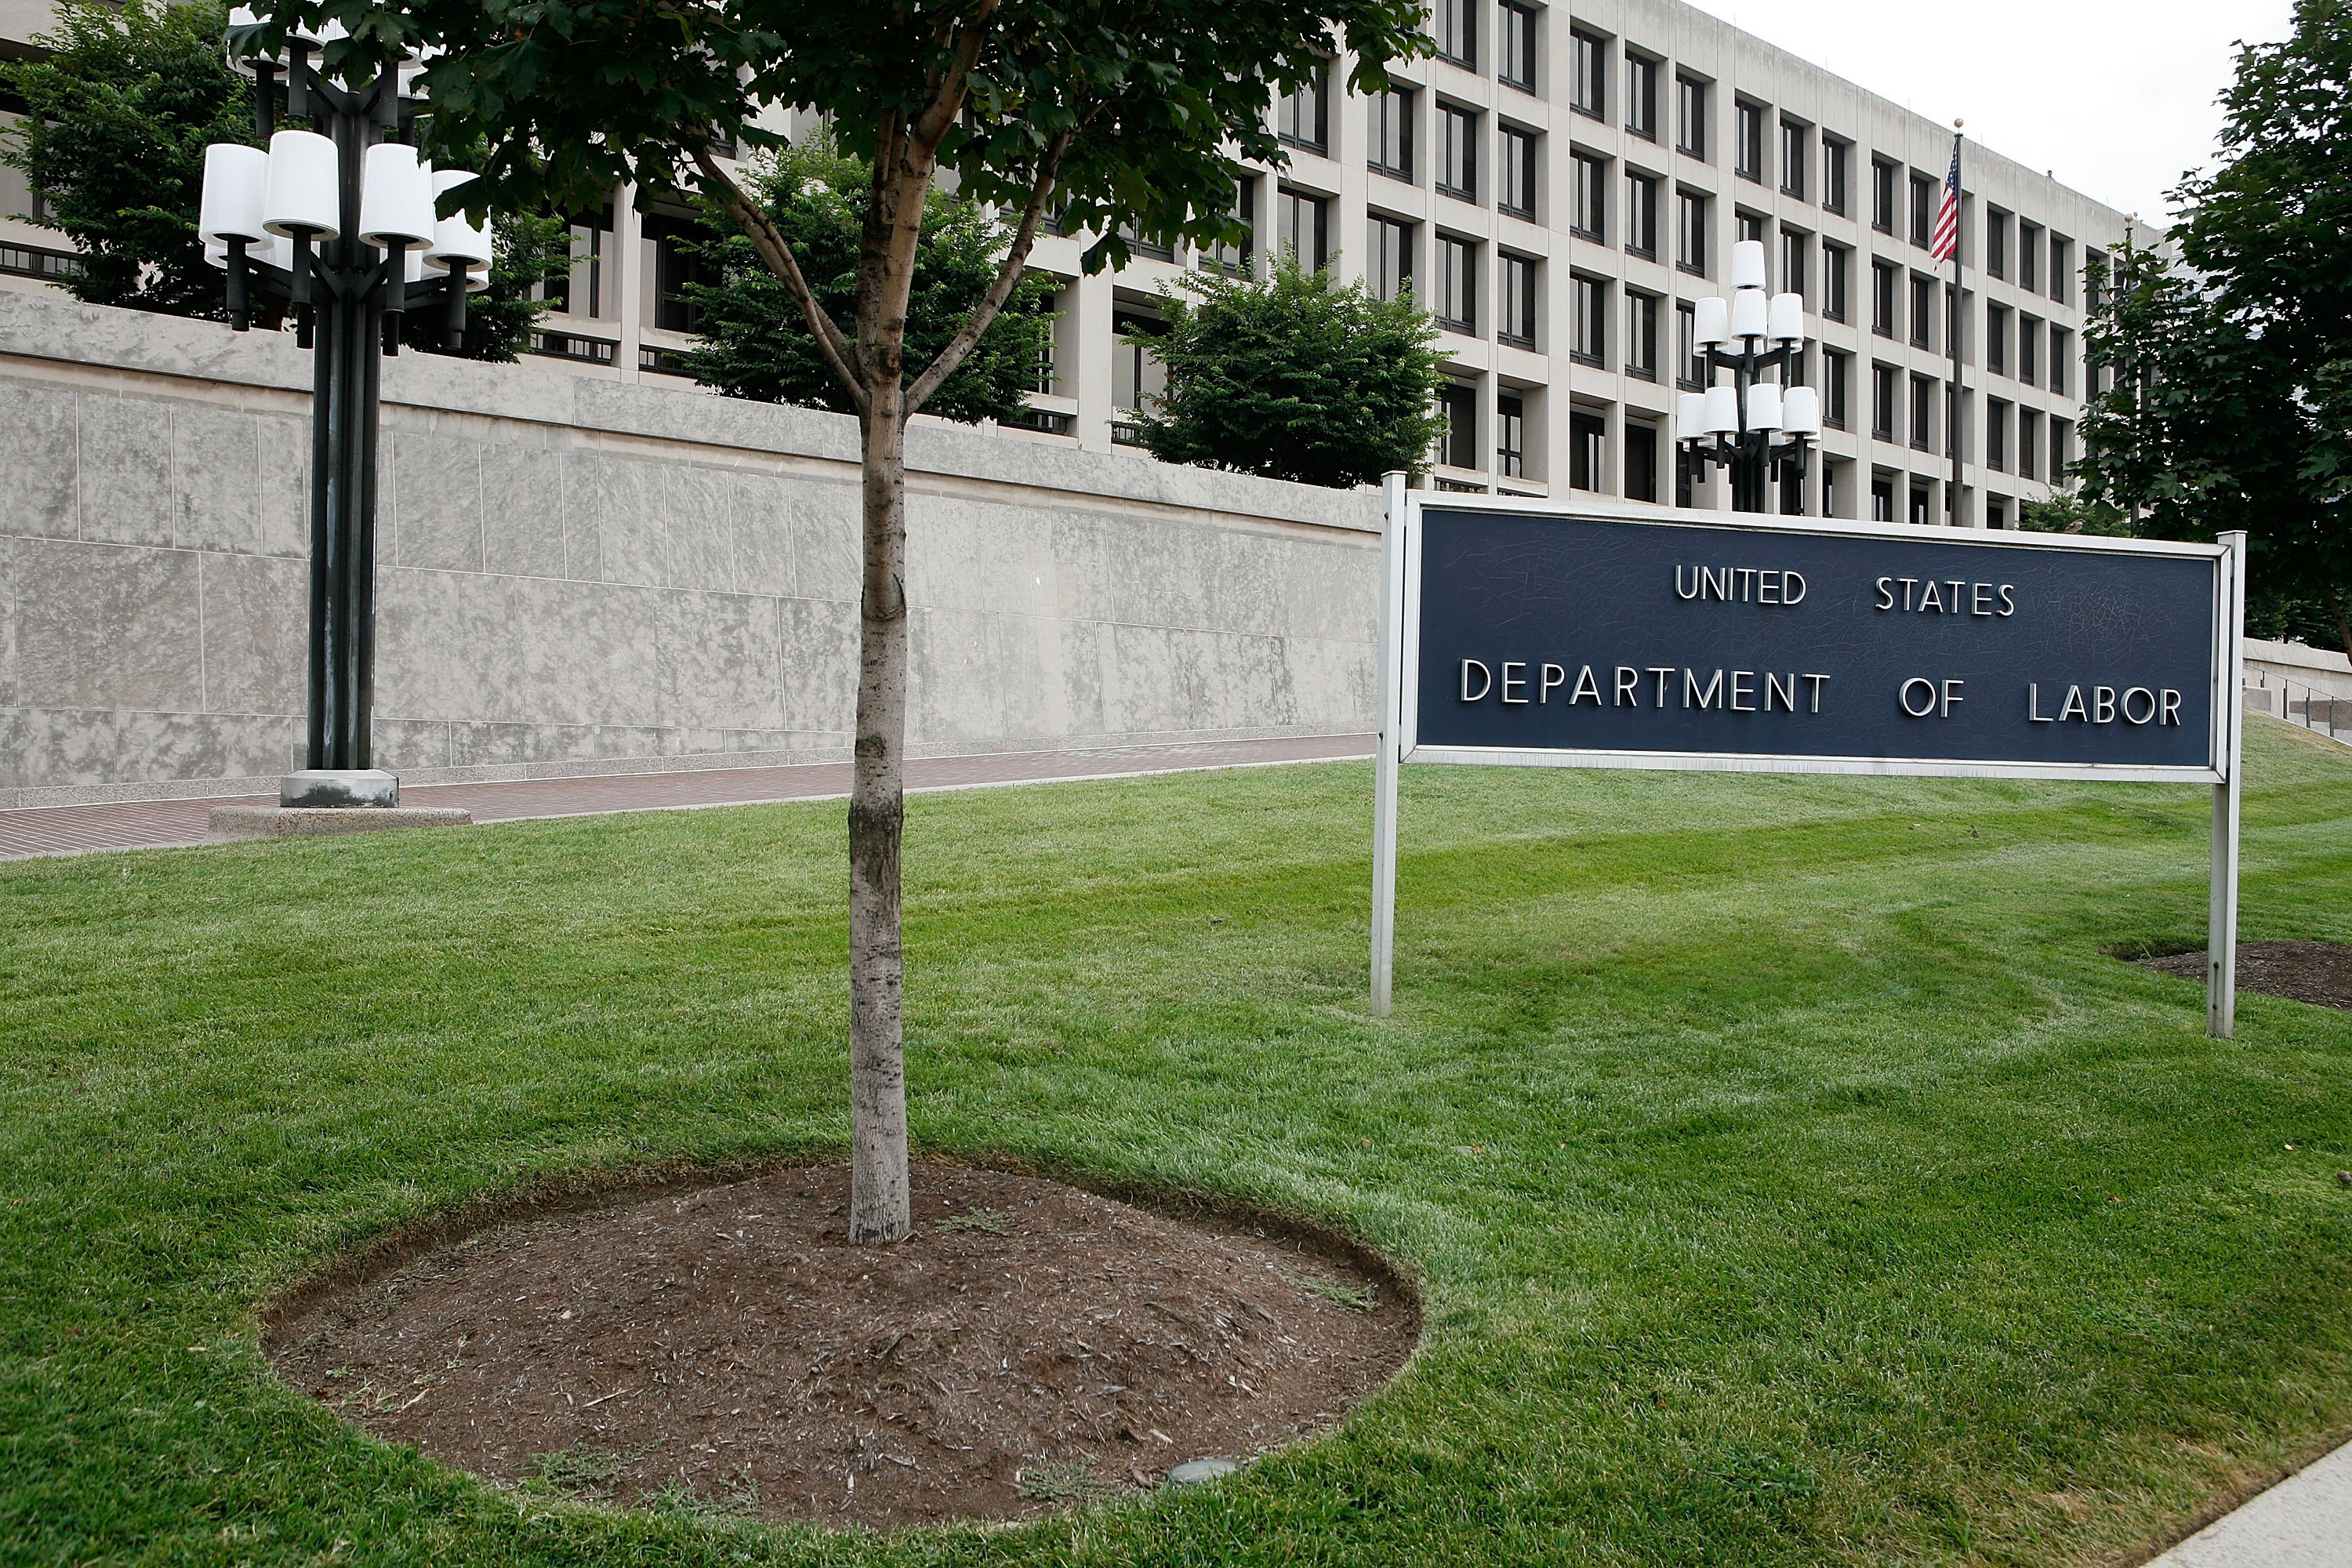 GSA floats swapping Labor Department headquarters for new site